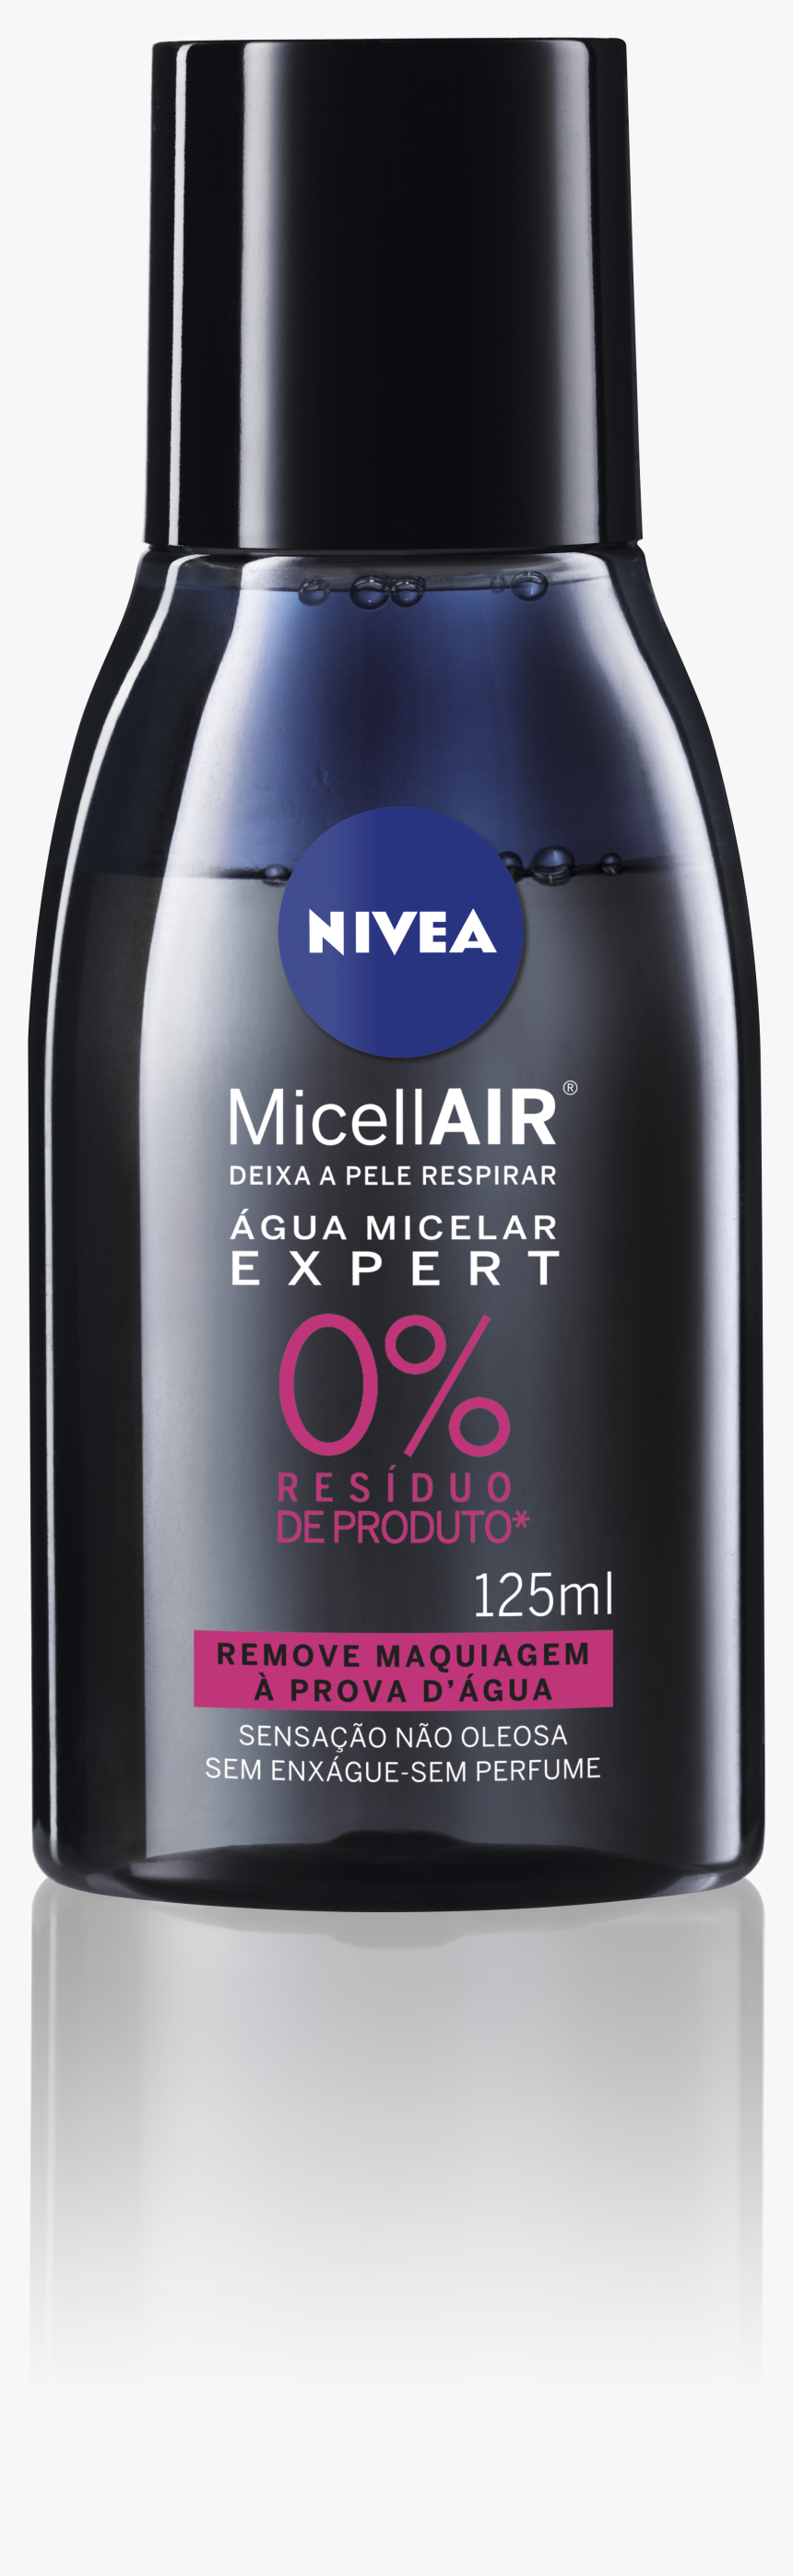 Micellair Skin Breathe Professional, HD Png Download, Free Download